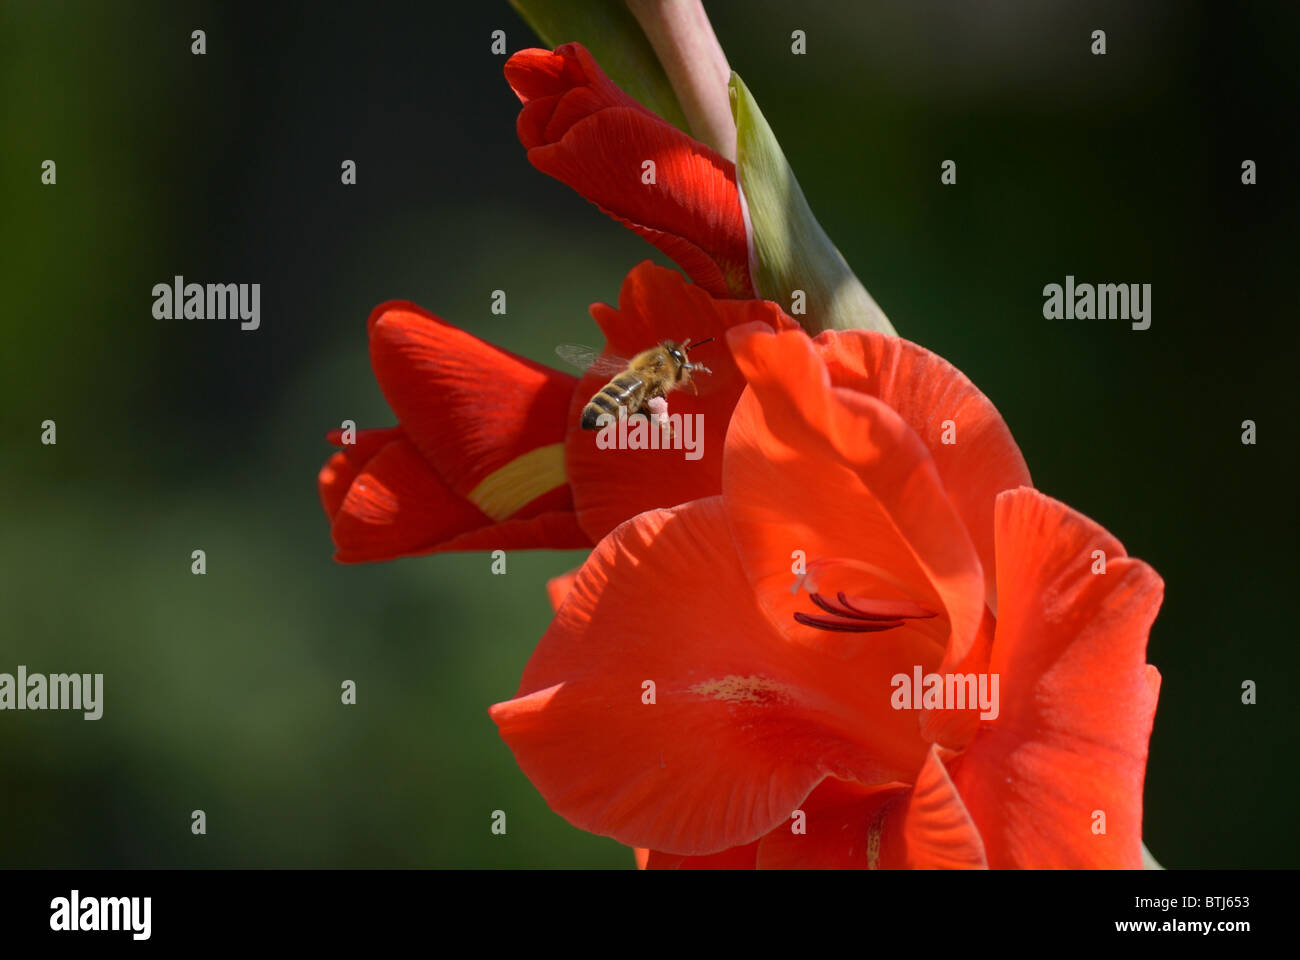 bee near a red flower of gladiolus Stock Photo